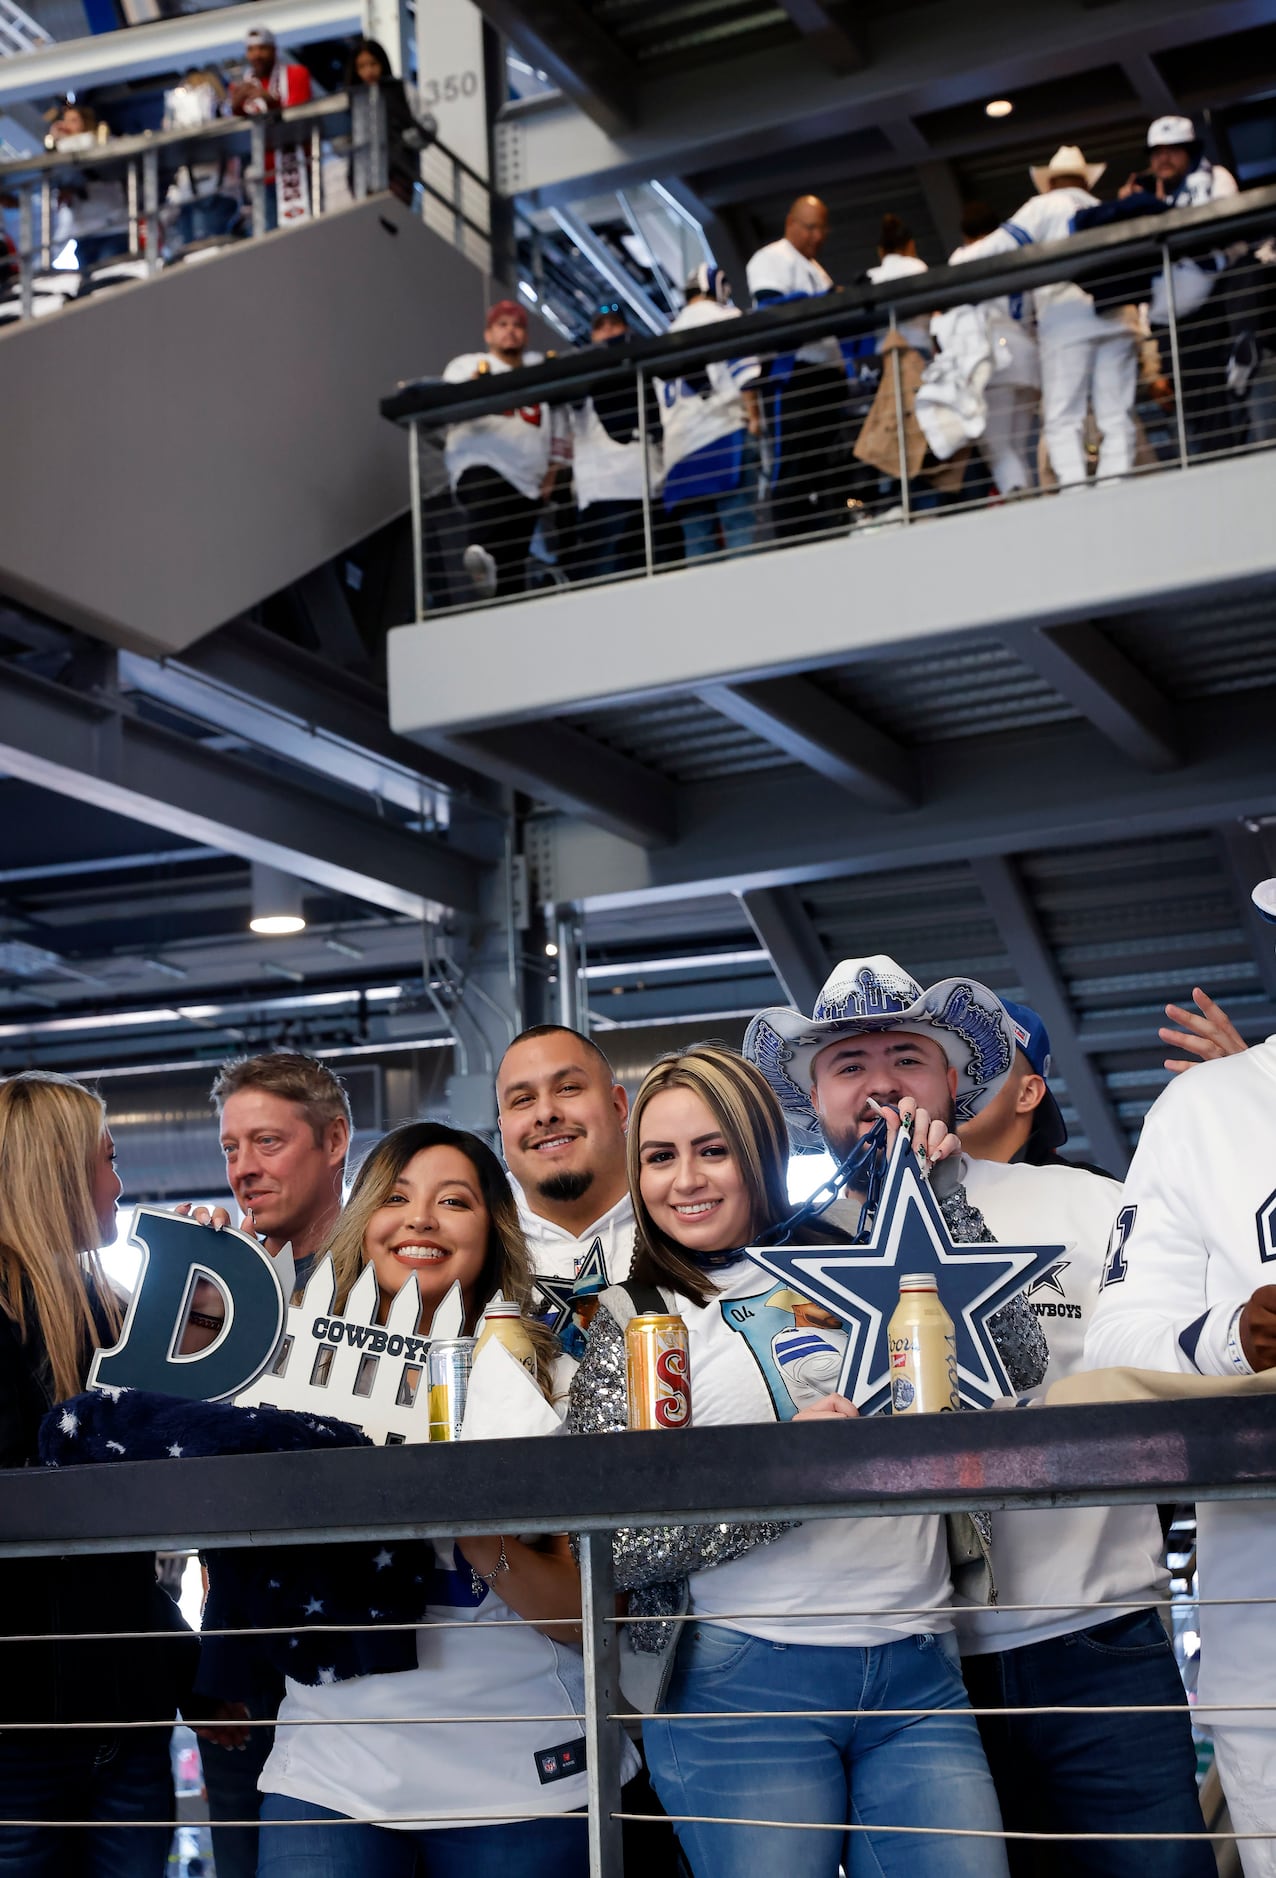 Photos: Playoff ready! Cowboys, fans prepare for wild card matchup vs.  49ers at AT&T Stadium